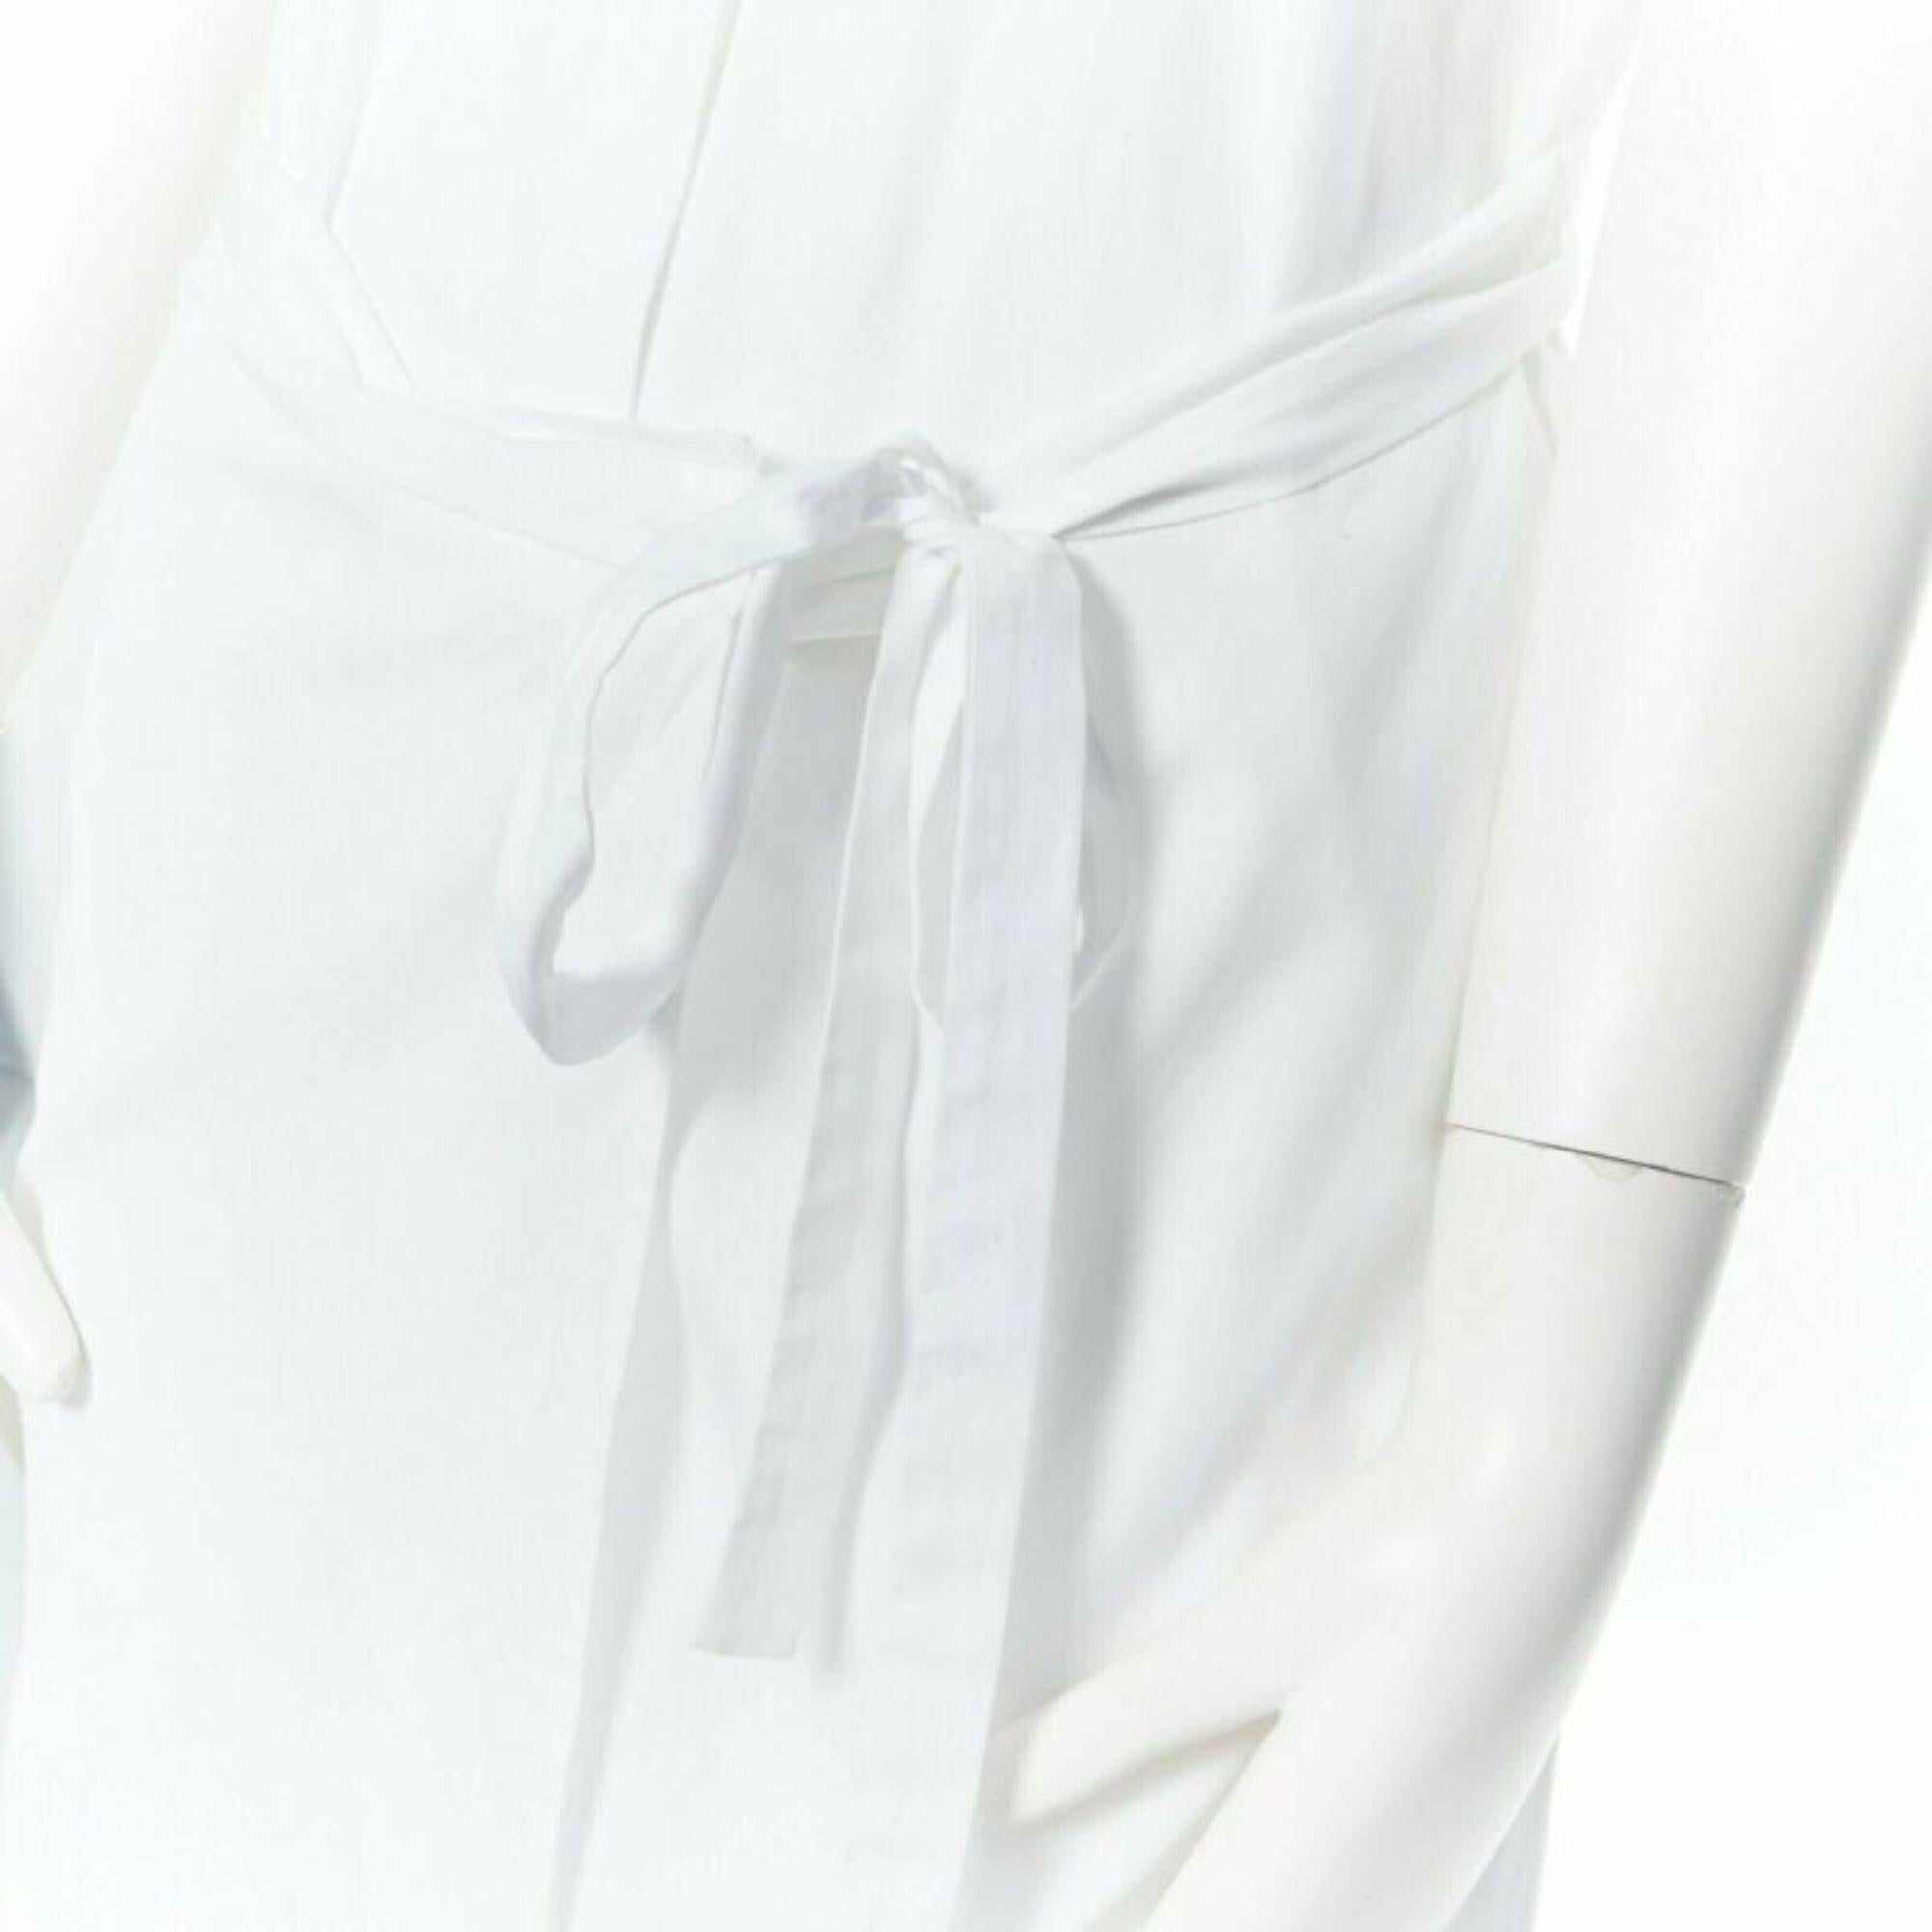 ROSETTA GETTY white cotton maxi long shirt dress apron fold minimal tie US0 XS
Reference: LNKO/A01105
Brand: Tibi
Material: Cotton
Color: White
Pattern: Solid
Closure: Button
Extra Details: Shirt dress. Maxi length. Folded cap sleeves. Spread